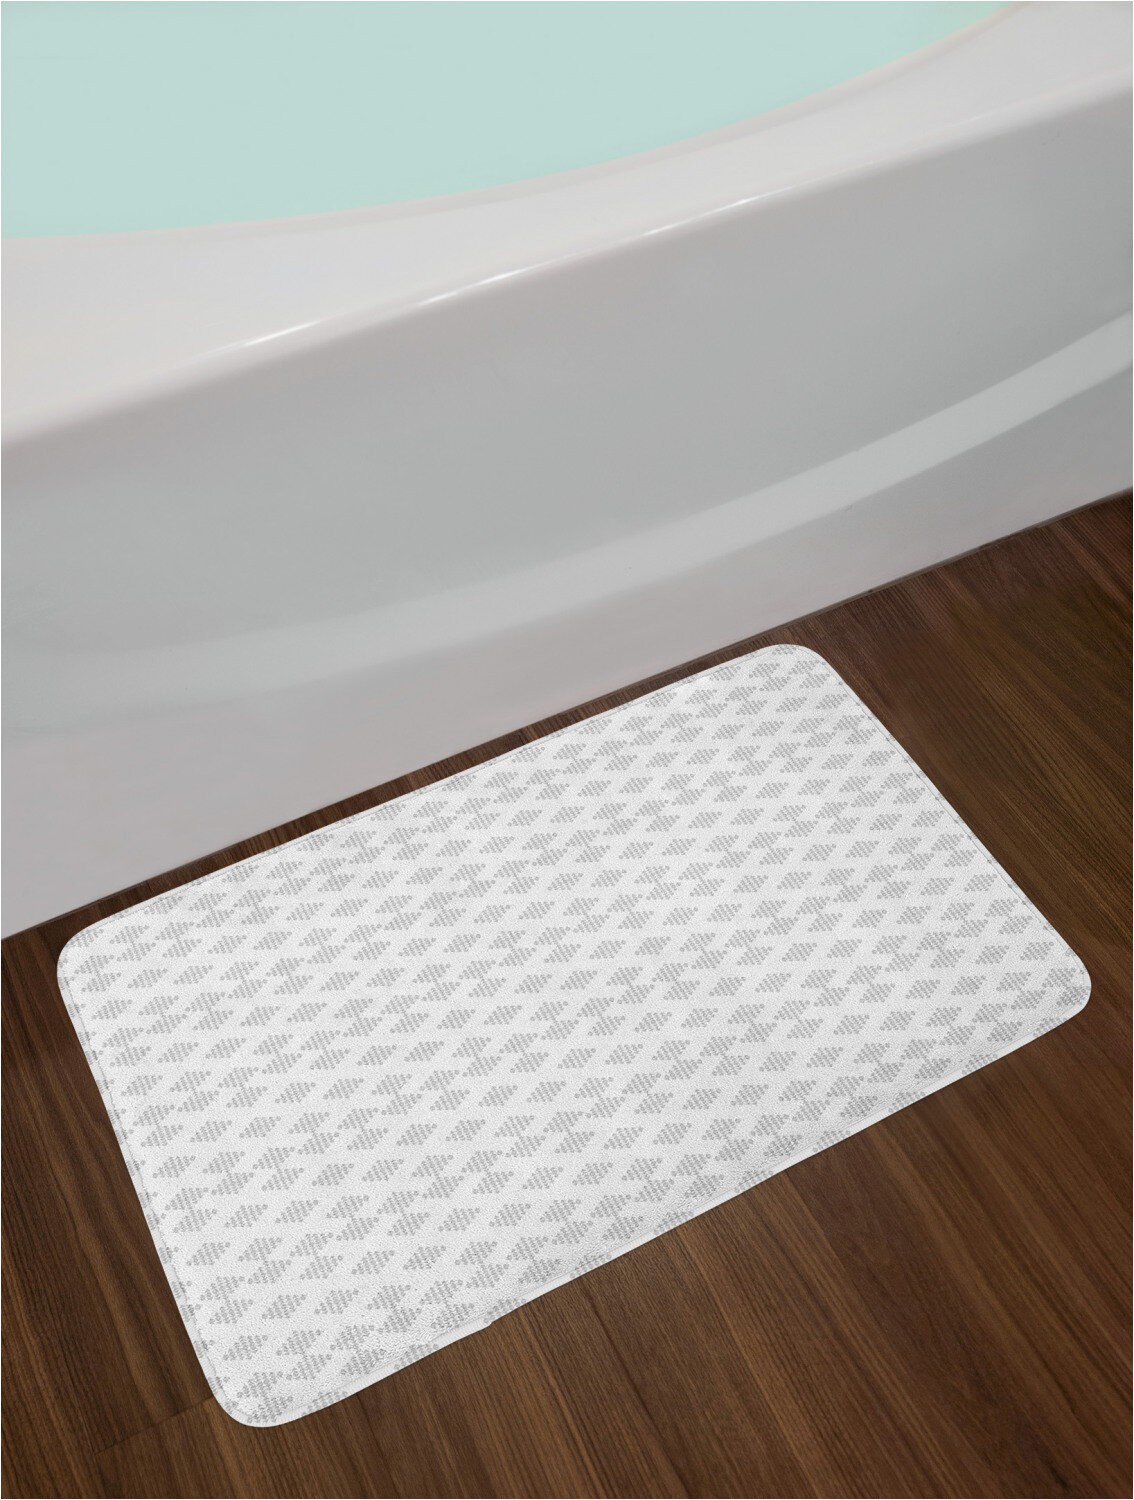 Braided Chenille Bath Rug Geometric Shapes Repetition In Contemporary Design Bath Rug